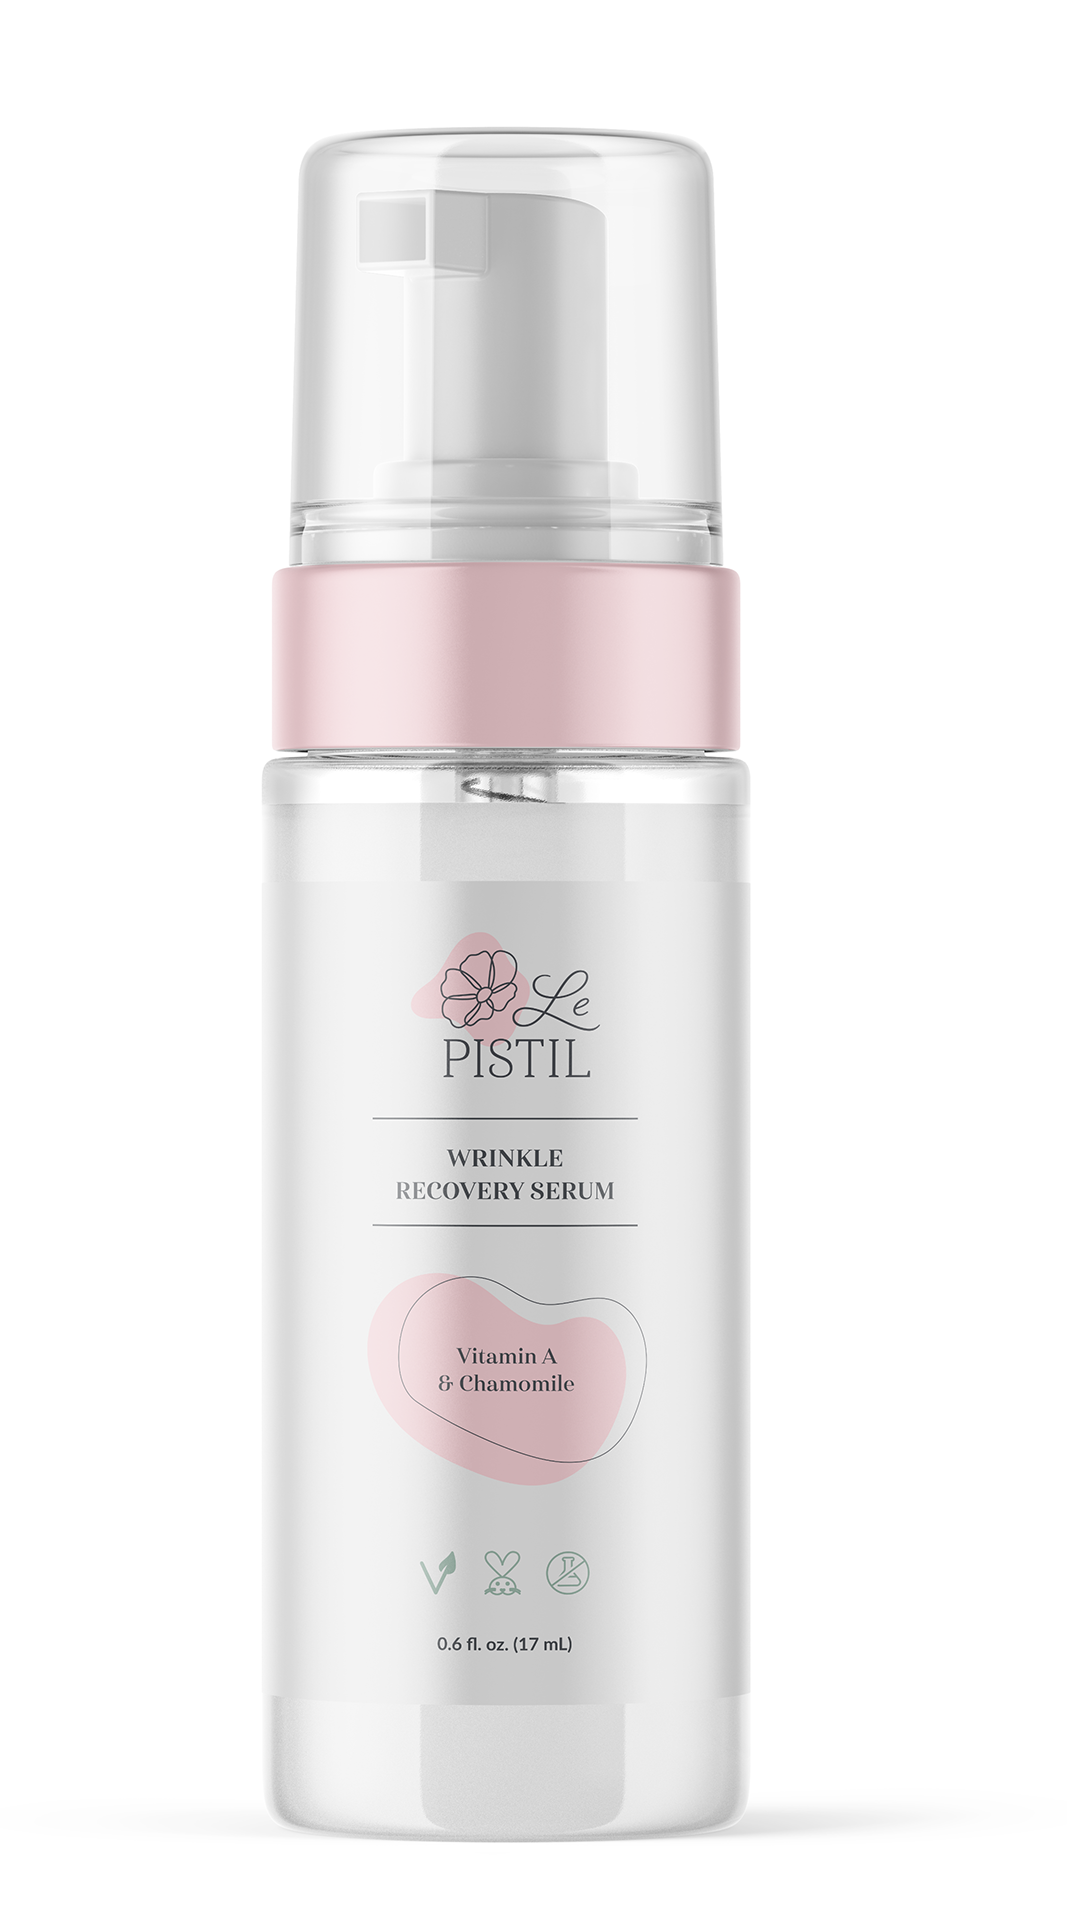 A modern skin care bottle with plastic pump featuring Le PISTIL branding